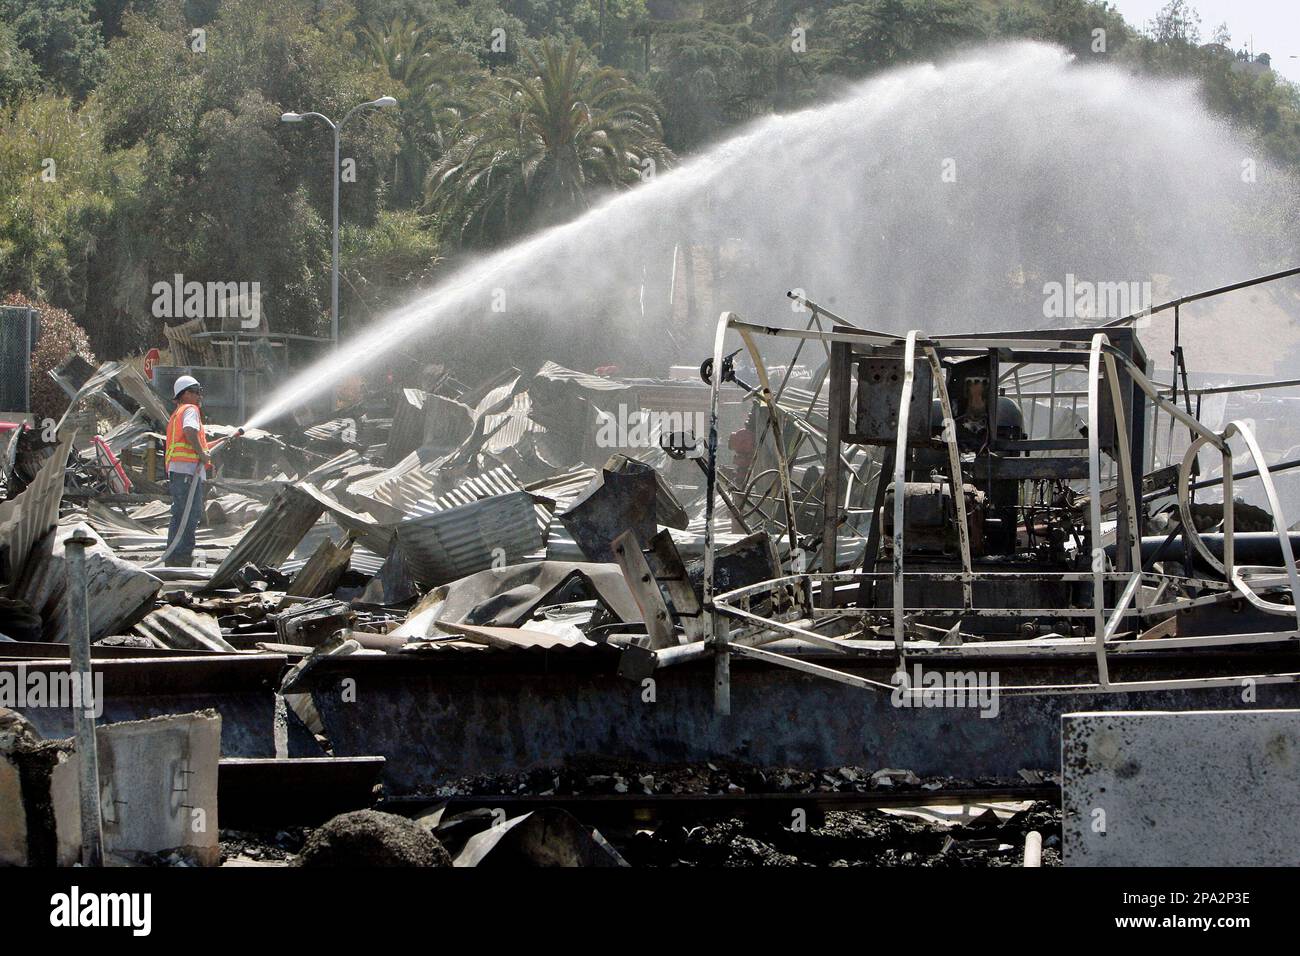 Ted Wayman, a Universal Studios' worker, hoses down the area outside the King Kong attraction Monday, June 2, 2008, at the Universal Studios Hollywood back lot, a day after a fire destroyed the sets of iconic films, in the Universal City section of Los Angeles. (AP Photo/Ric Francis) Stock Photo